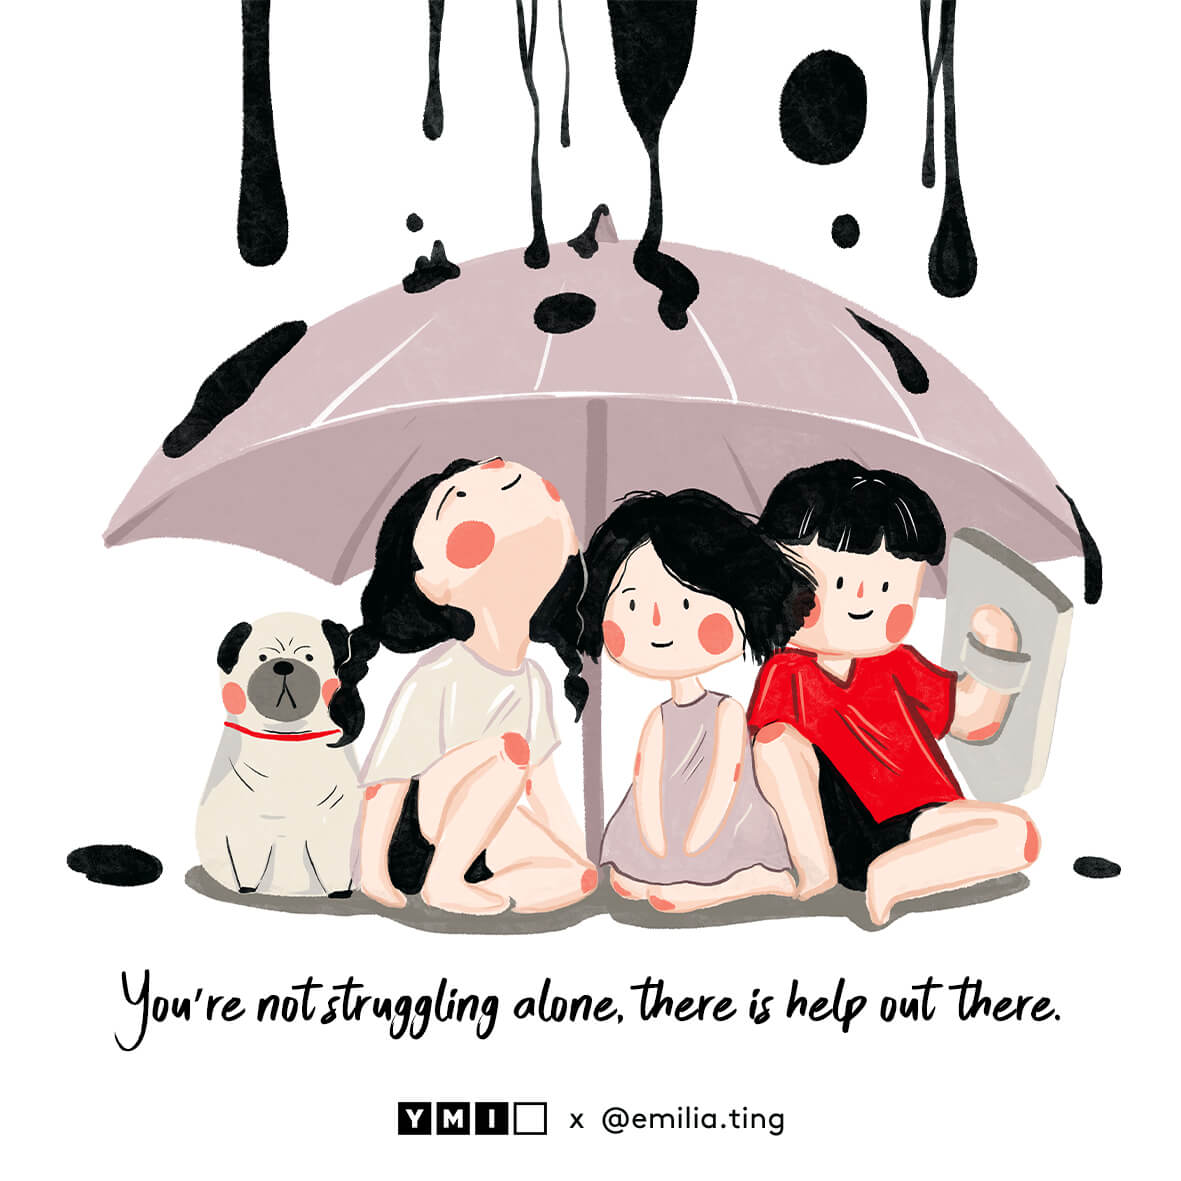 Image of 3 children and a dog shielding under an umbrella from a monster